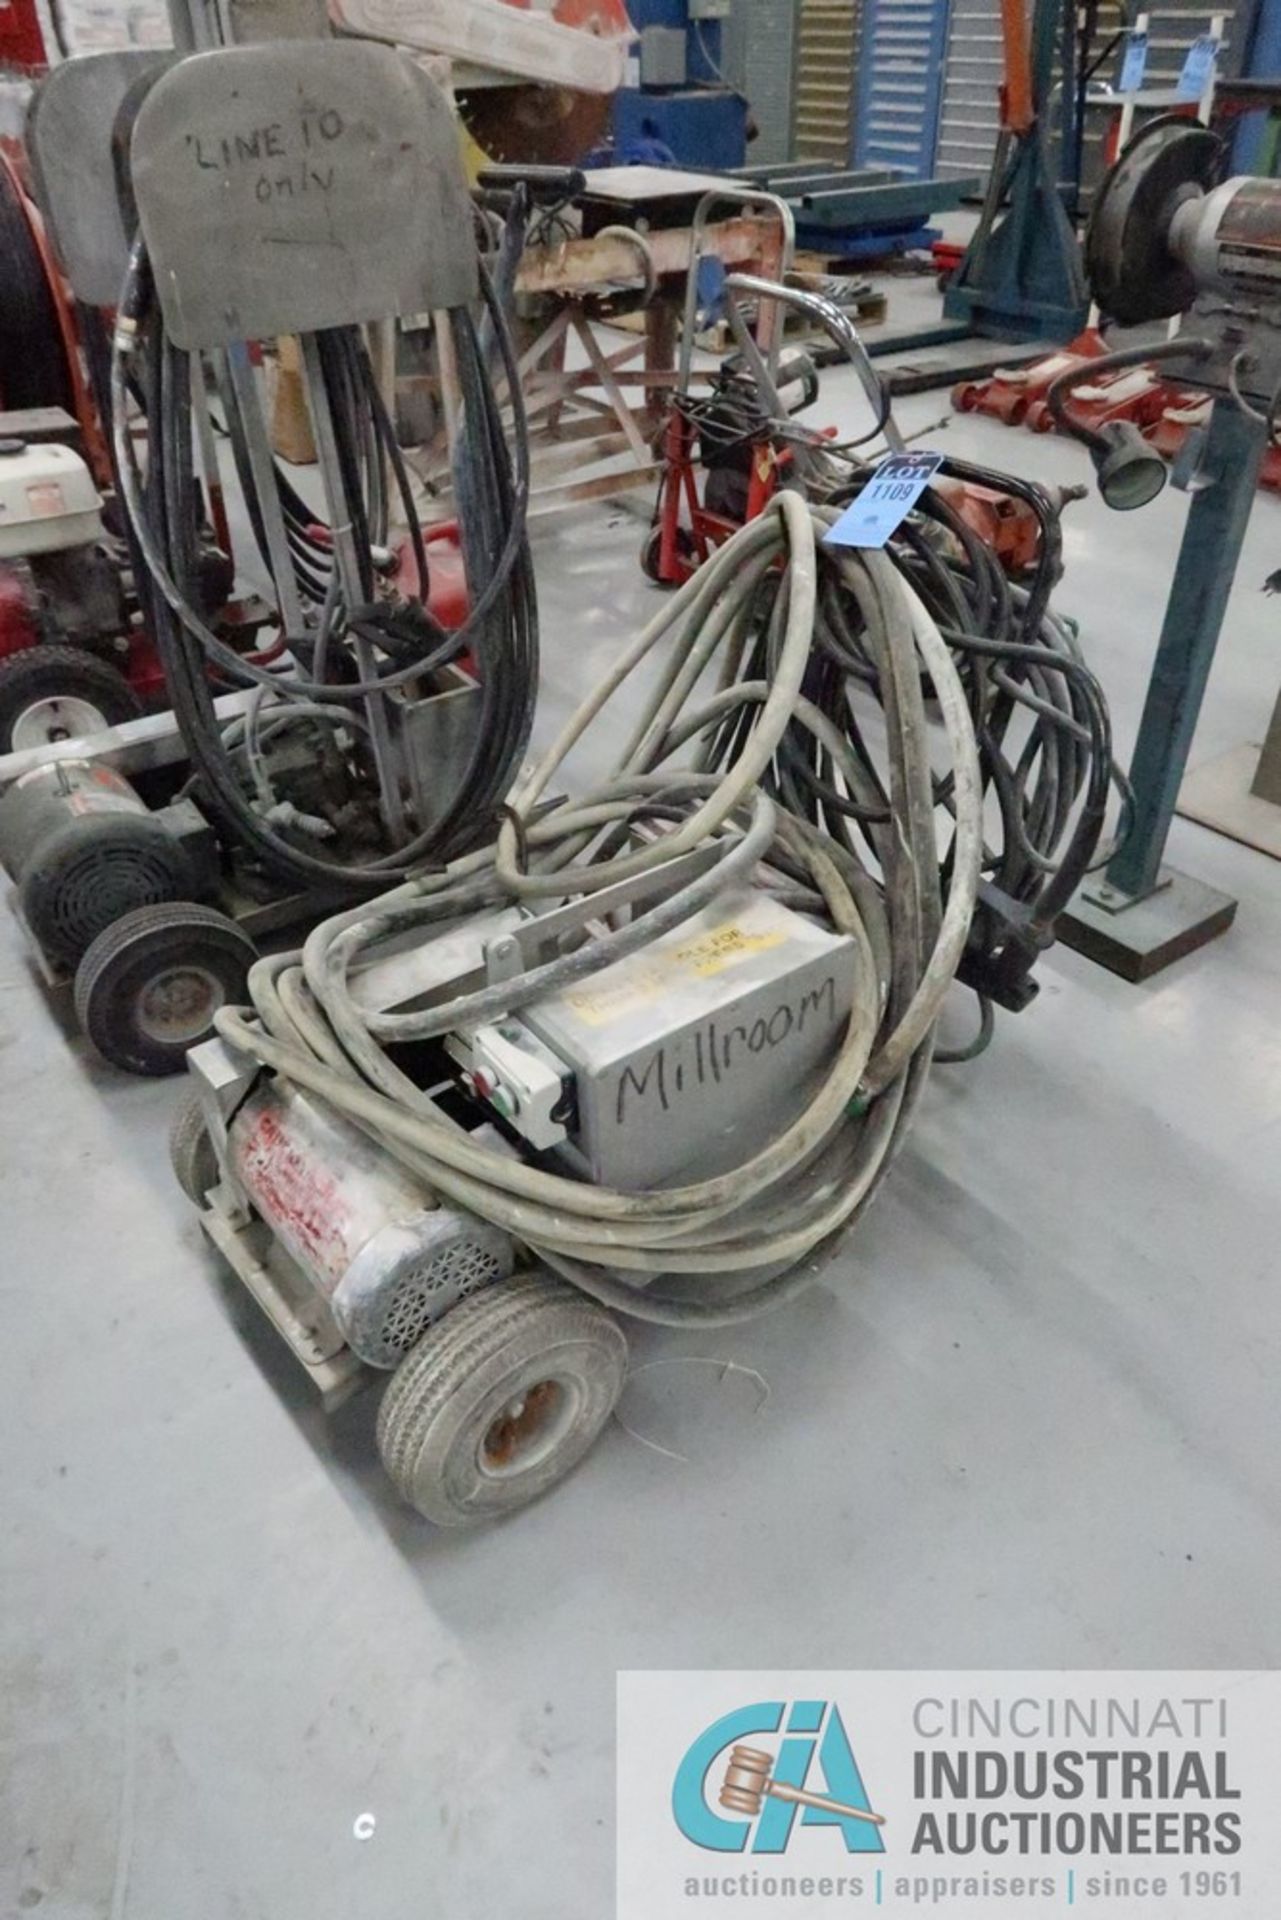 WHITCO MODEL 2418-EPC ELECTRIC PORTABLE PRESSURE WASHER; S/N 700-110, 3-PHASE, 208 VOLTS, 3 HP - Image 2 of 3